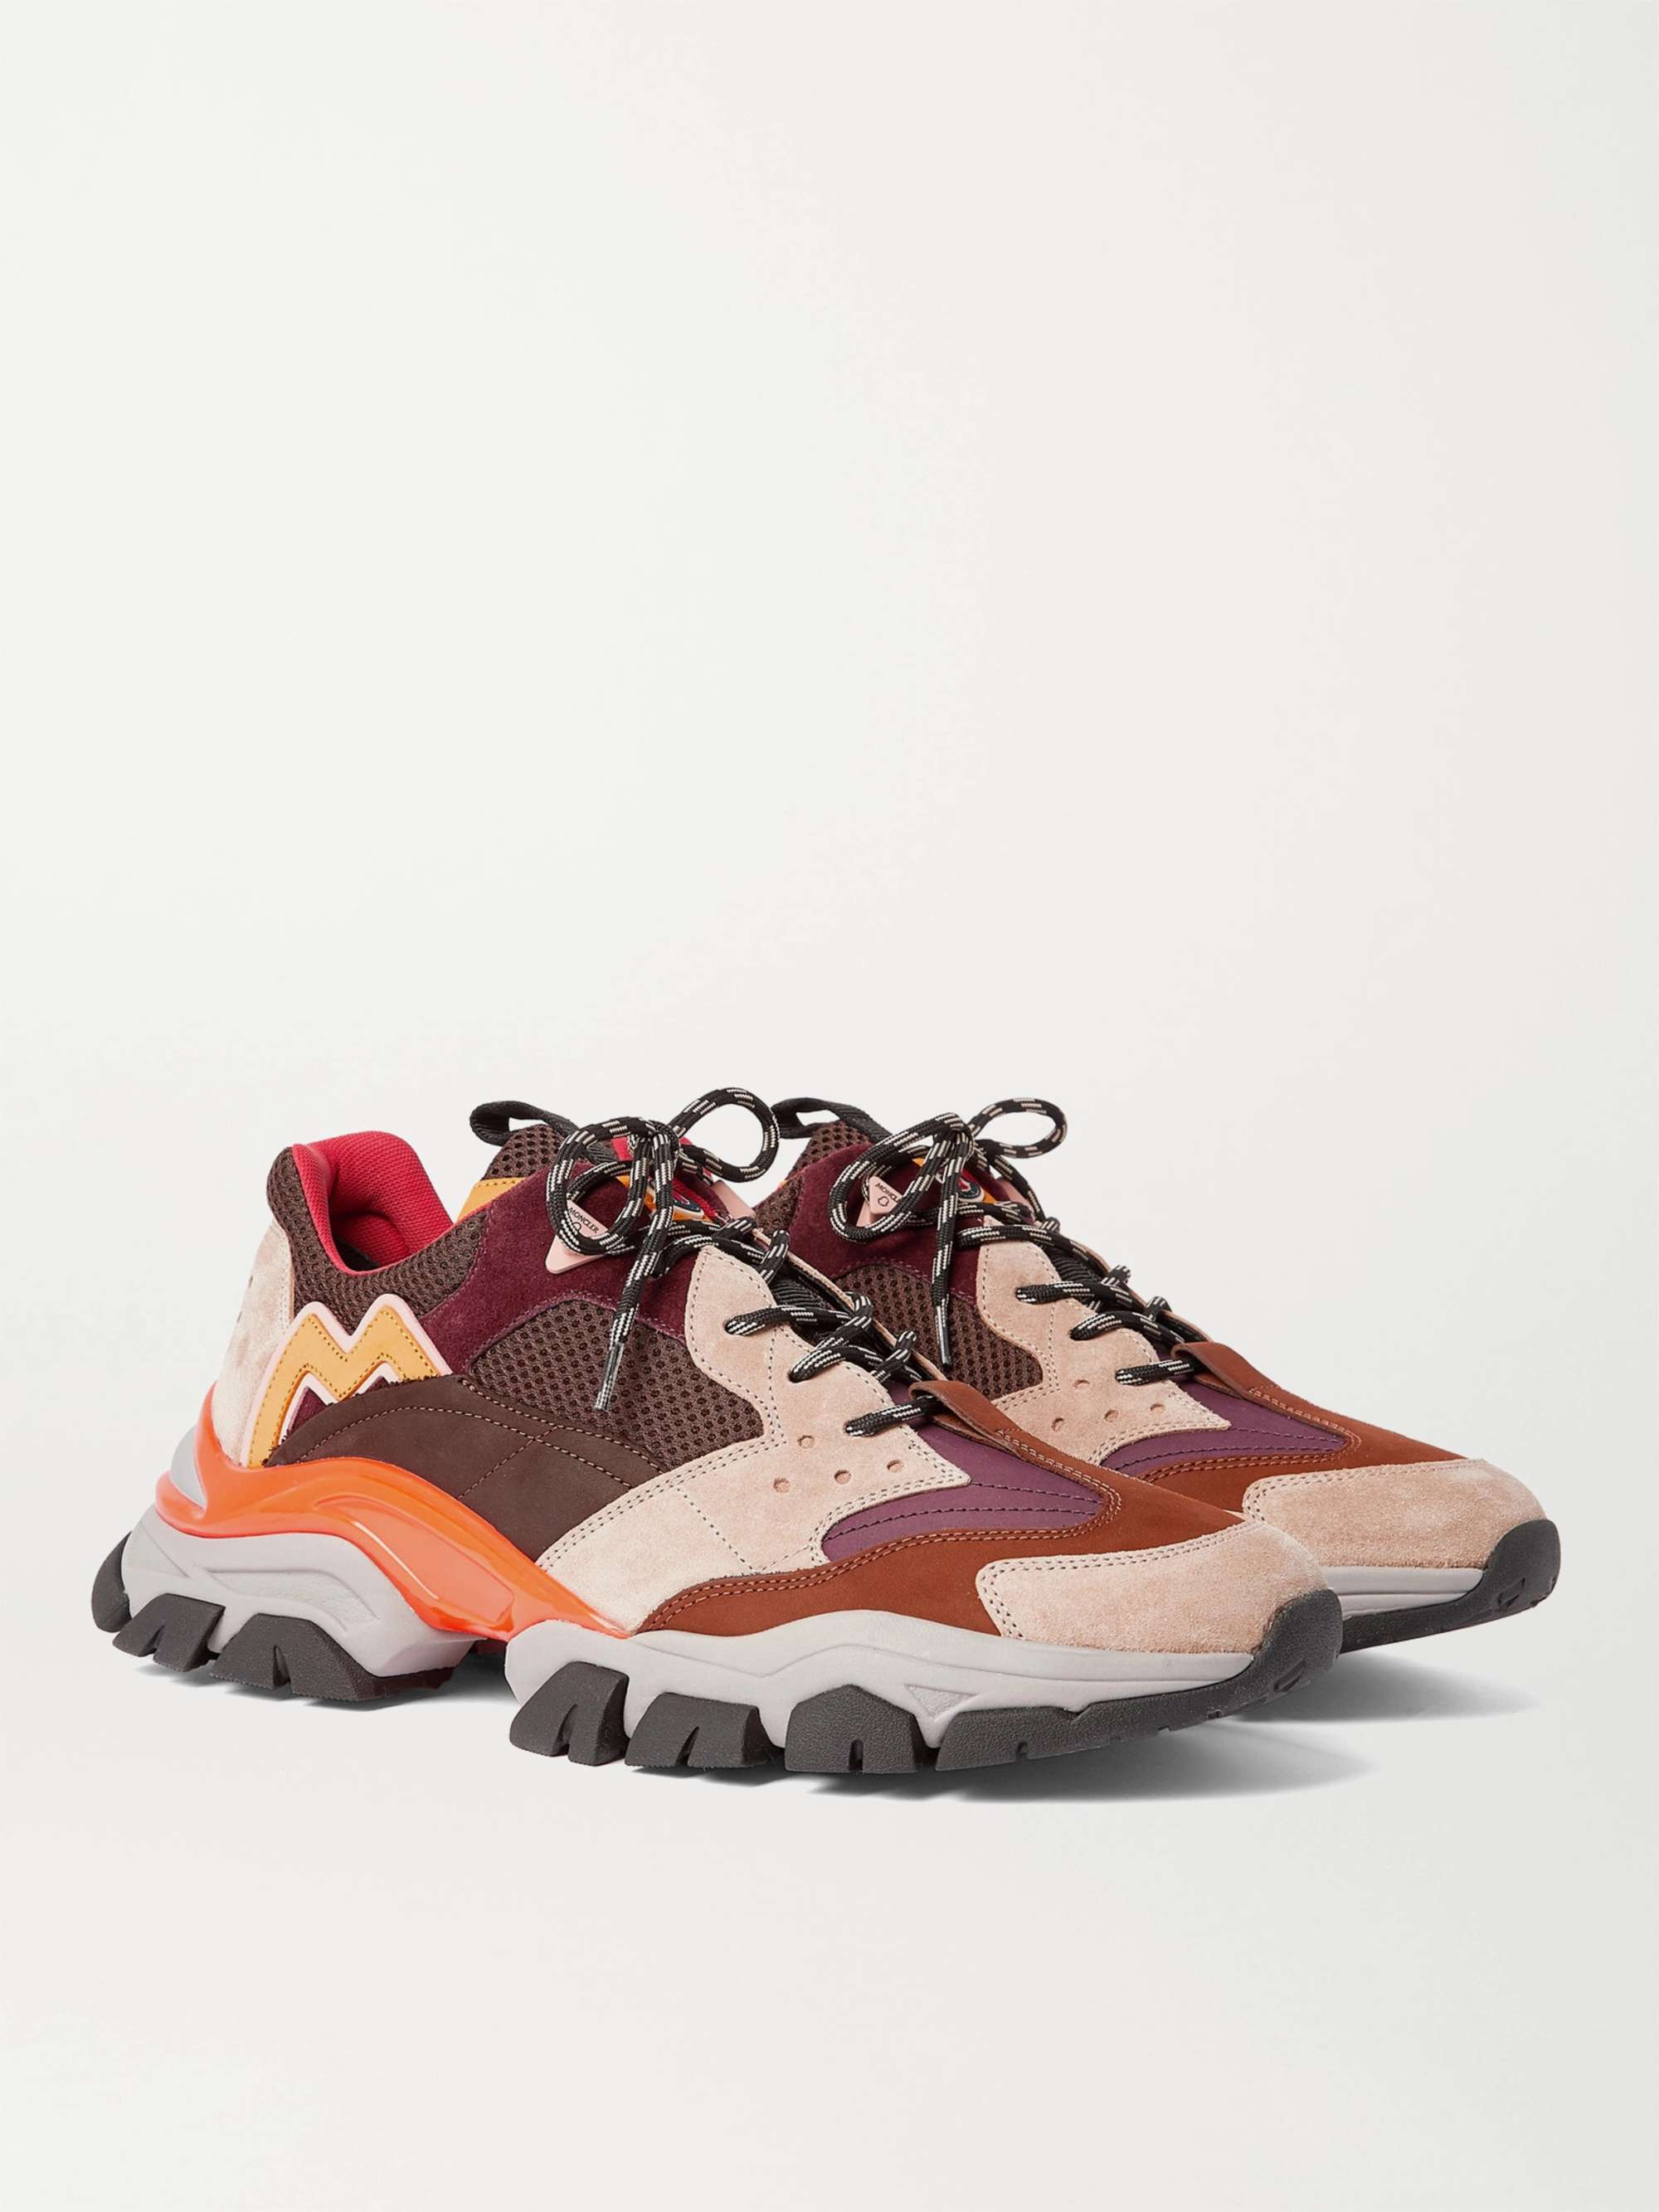 MONCLER Leave No Trace Leather, Suede and Mesh Sneakers